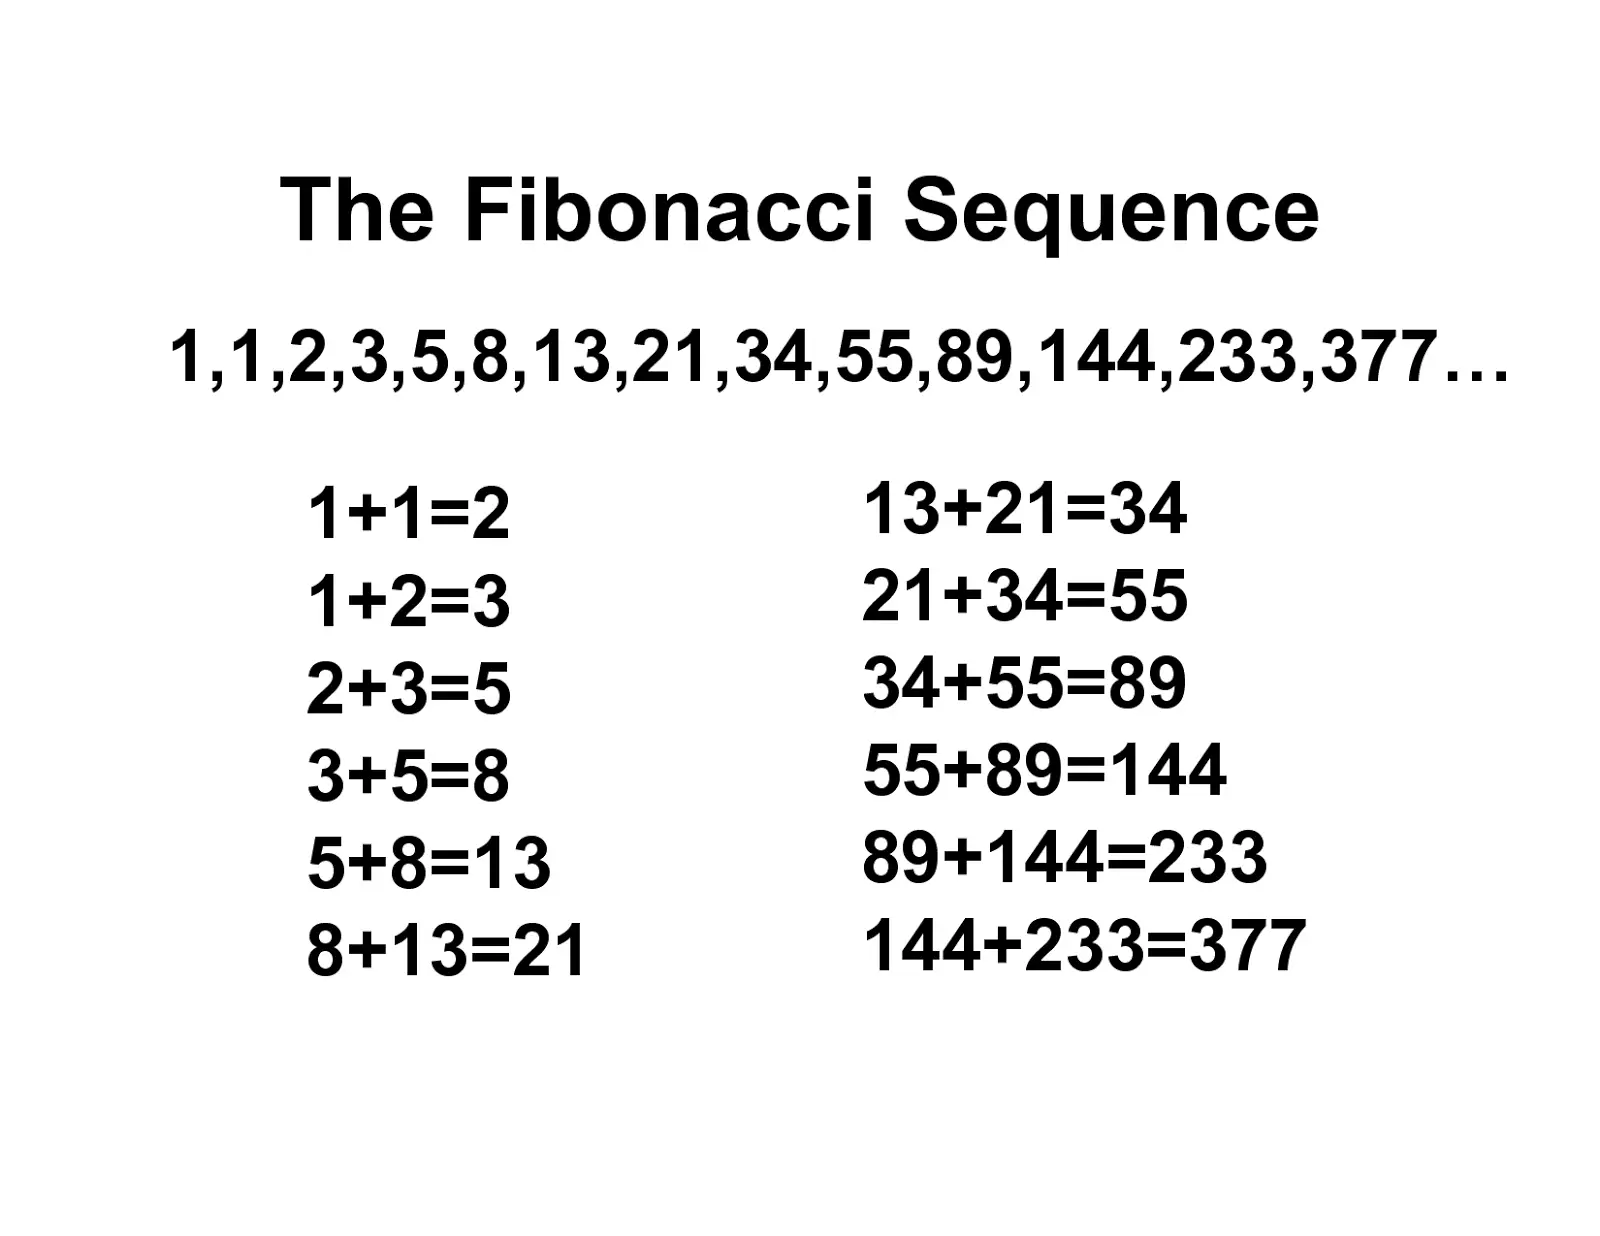 1. Fibonacci Sequence Tattoo Designs and Meanings - wide 1